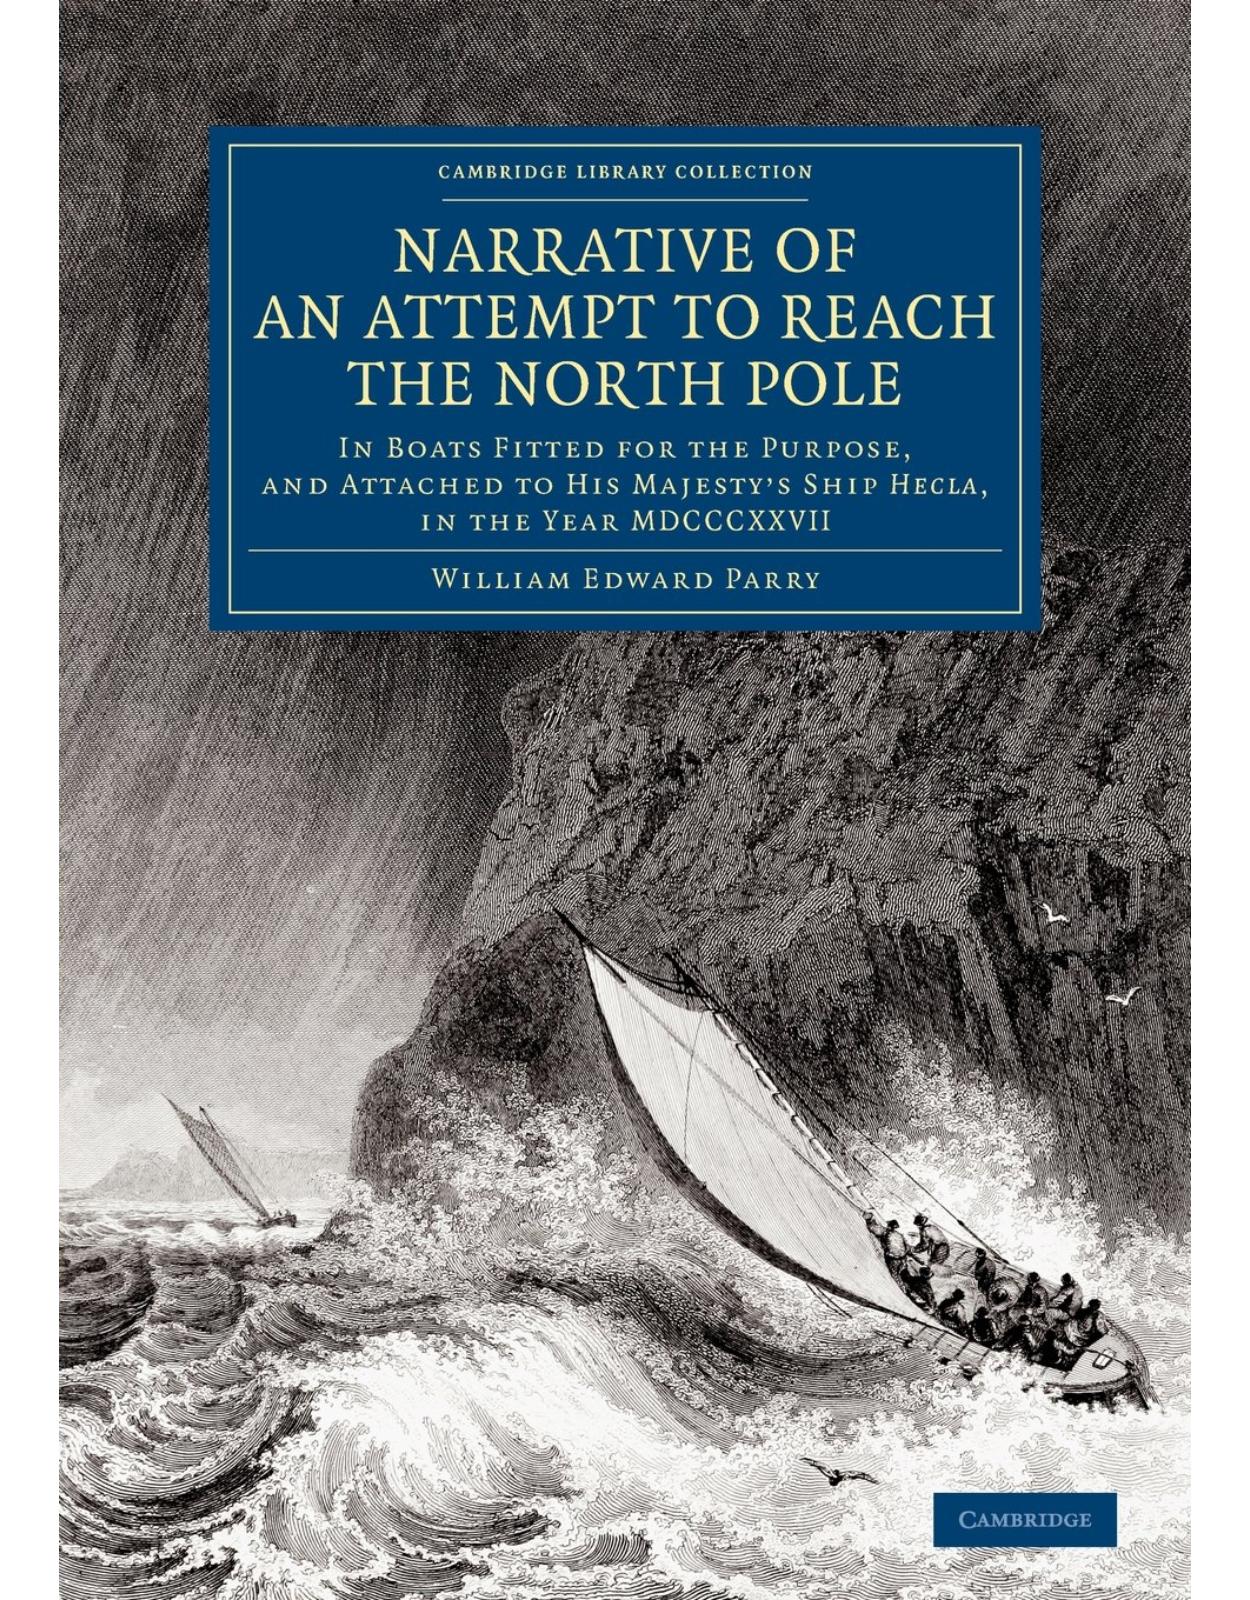 Narrative of an Attempt to Reach the North Pole: In Boats Fitted for the Purpose, and Attached to His Majesty's Ship Hecla, in the Year MDCCCXXVII, ... Library Collection - Polar Exploration) 